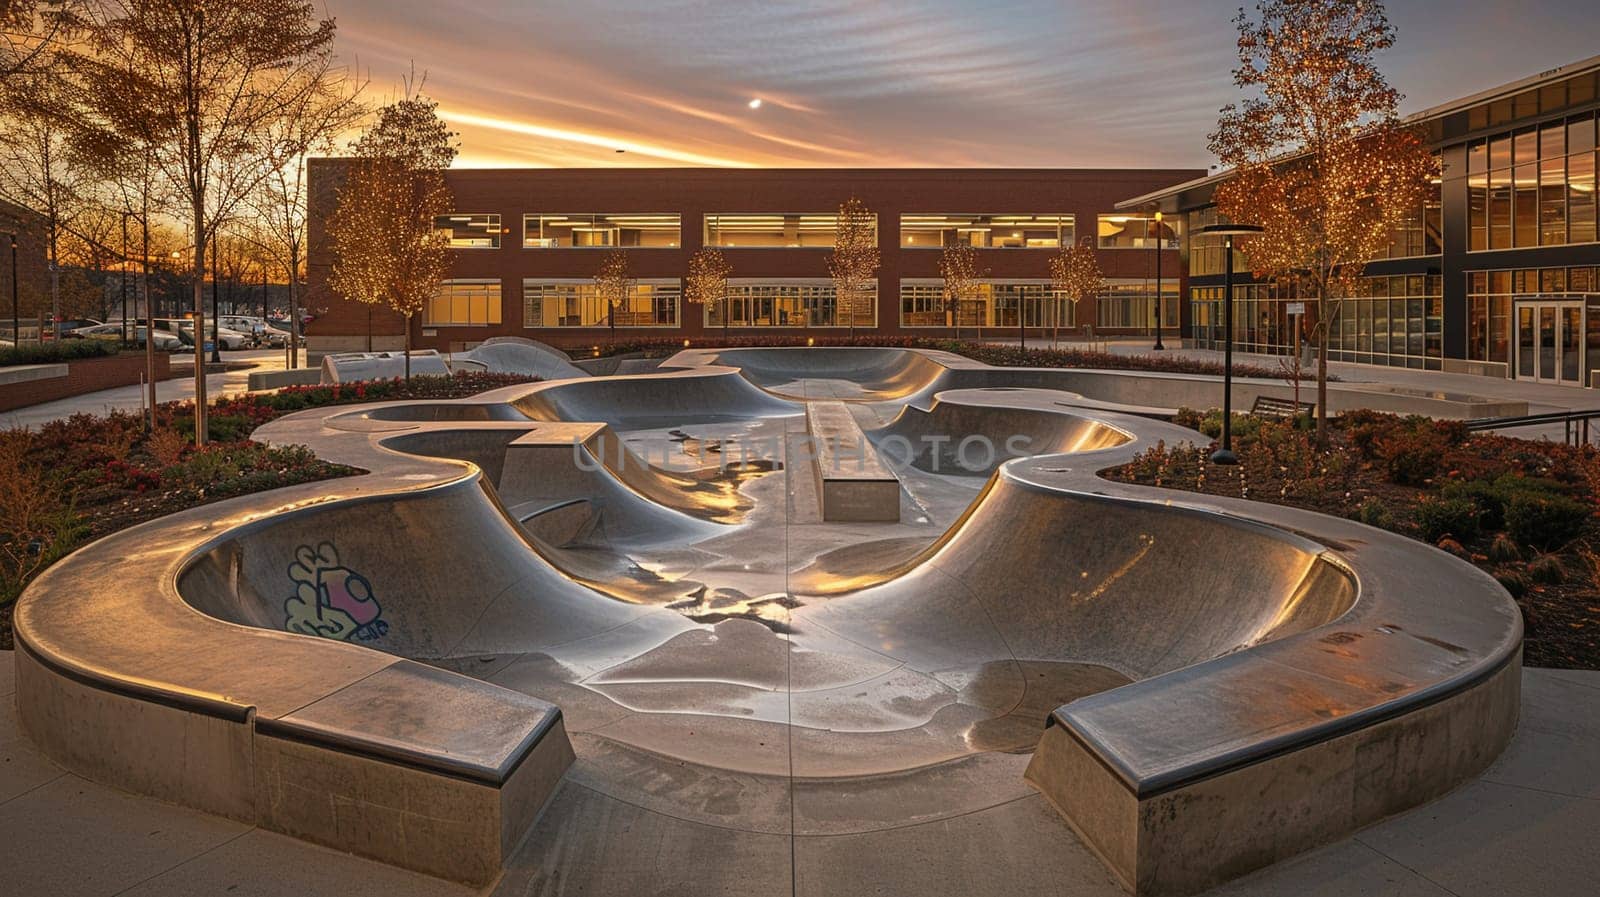 Skateboard Ramps Grind Urban Culture in Business of Youth Sports by Benzoix